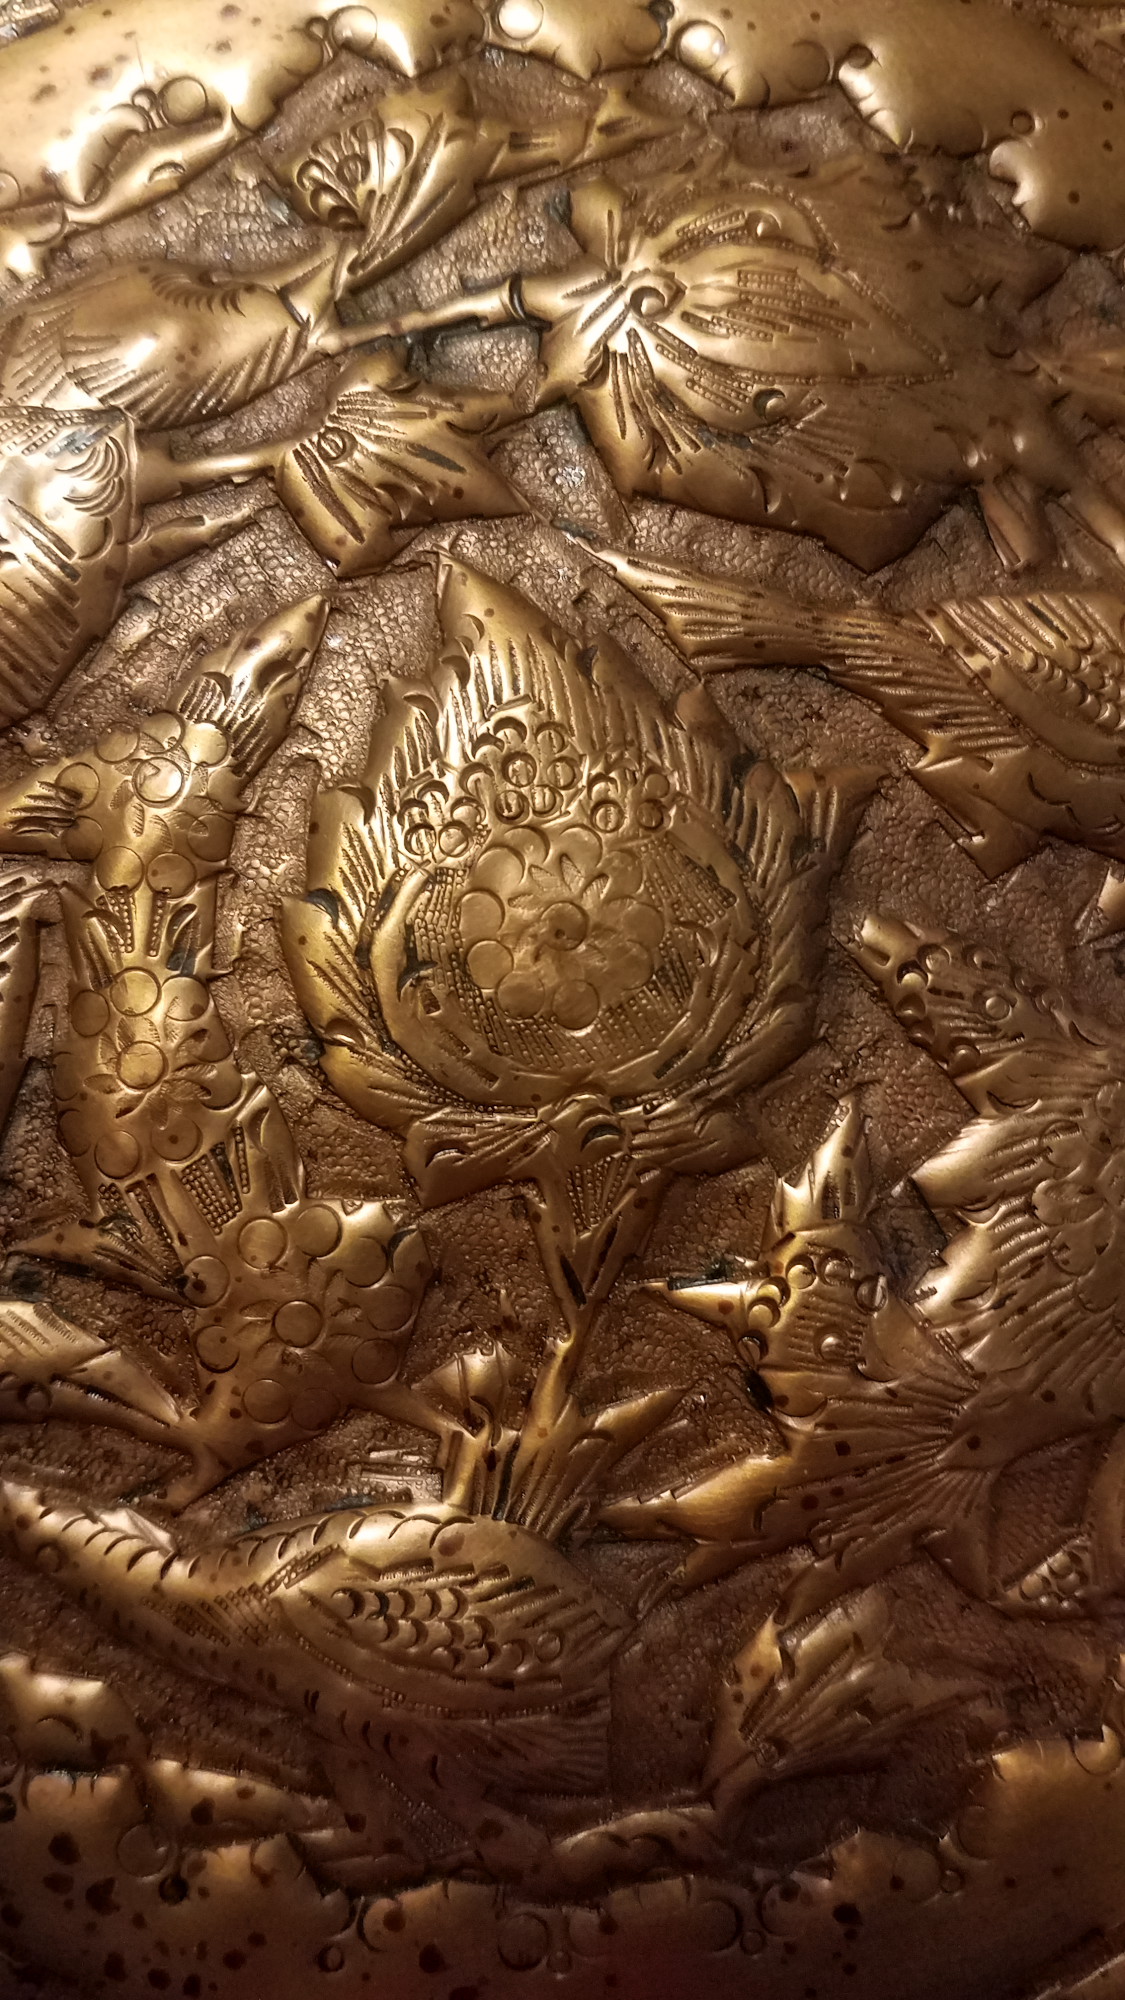 Copper repoussé and chased copper decorative plates - where from ...